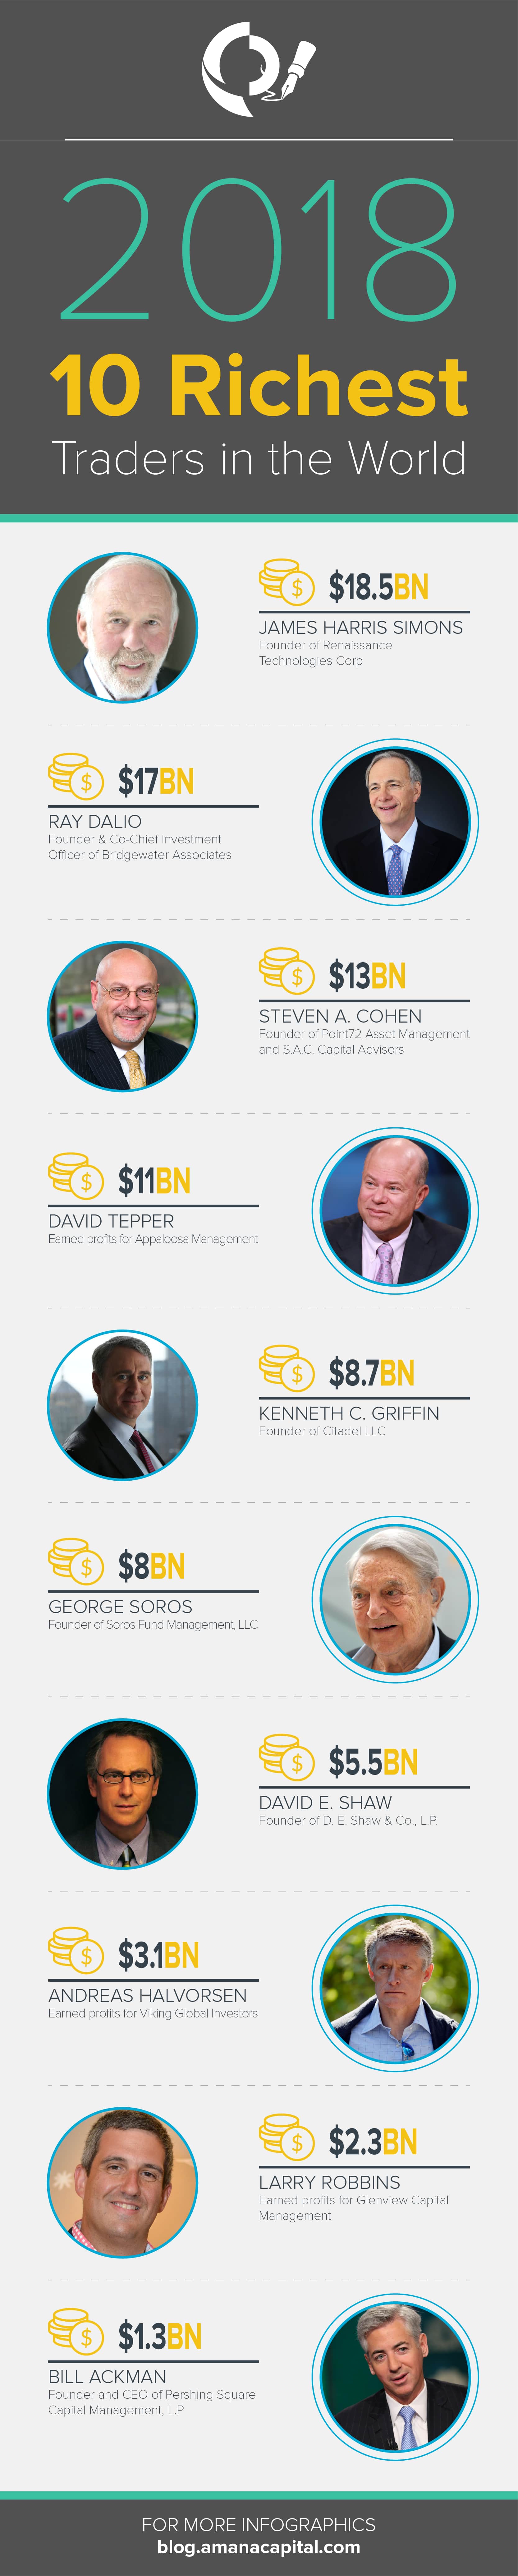 10 Richest Traders Worldwide Infographic